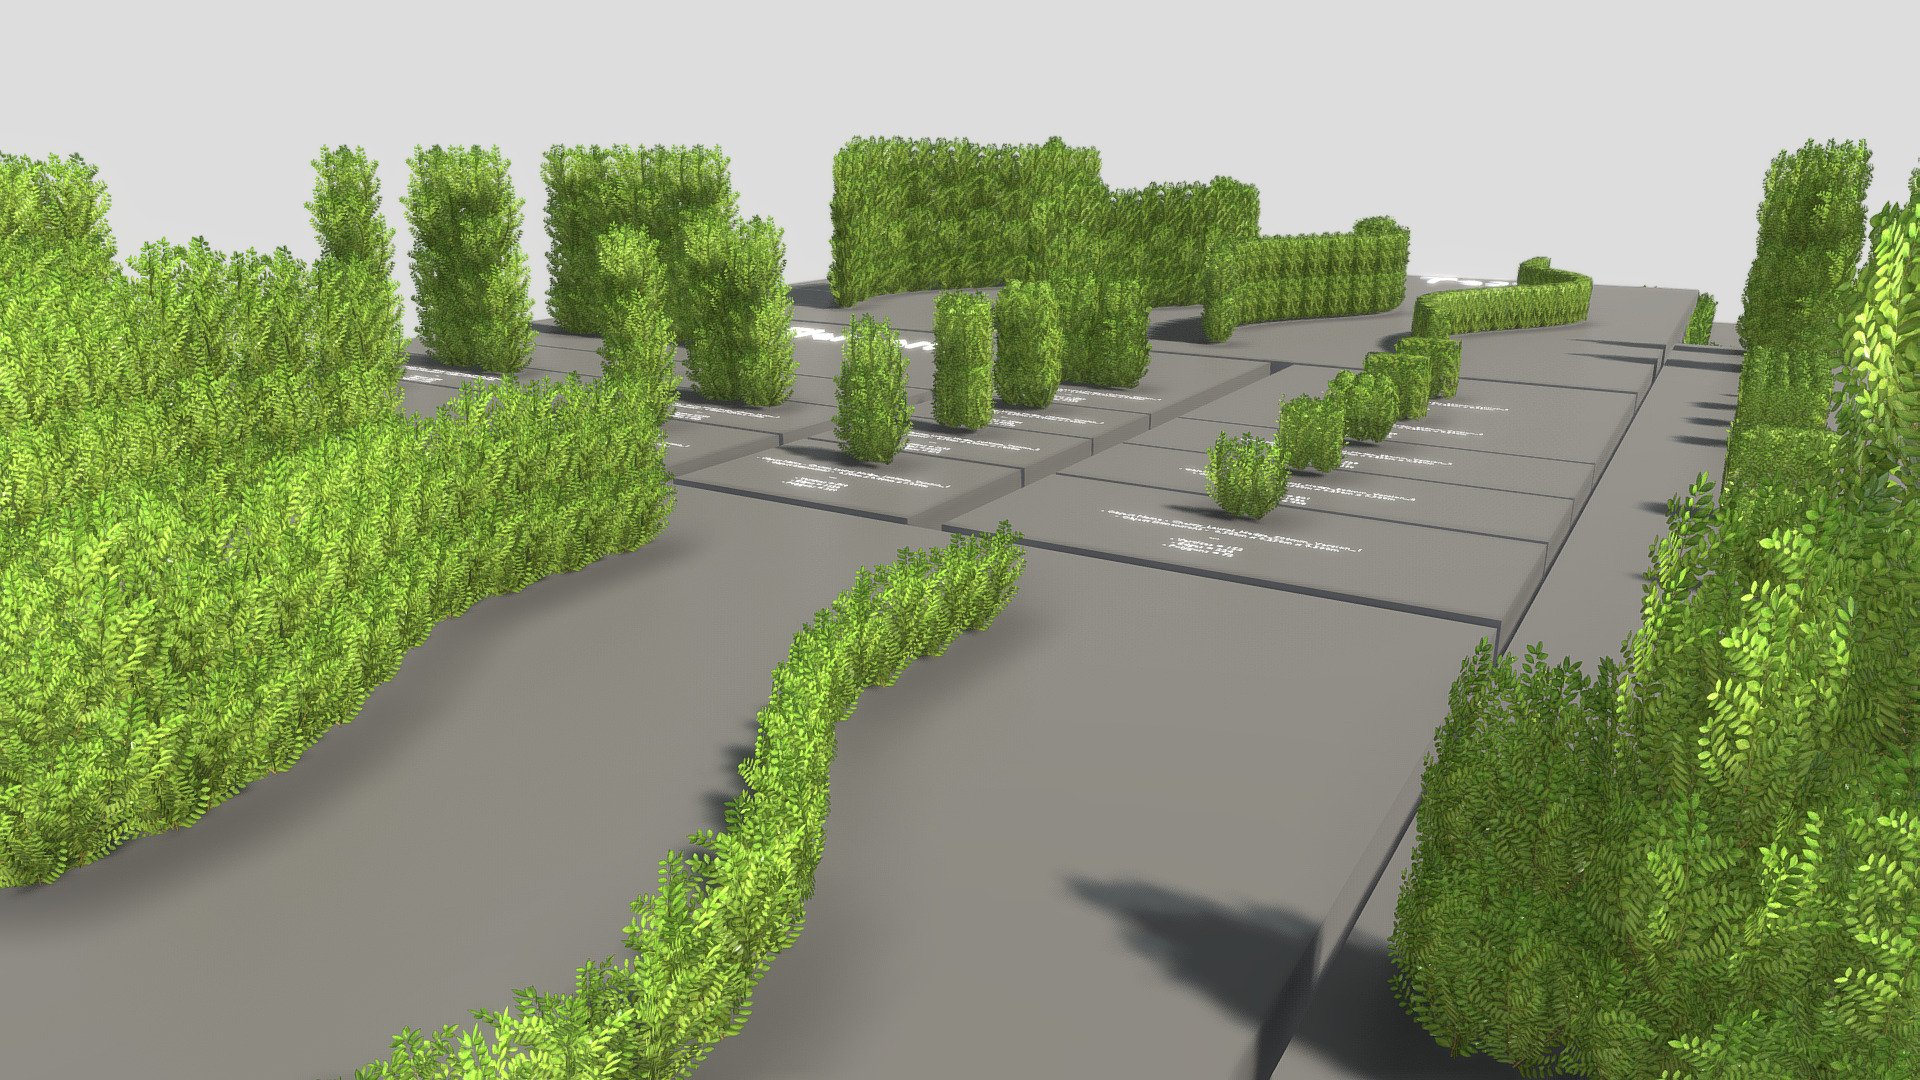 Here are 14 low-poly cherry laurel hedge parts.
Also included are 10 curve-based geometry-nodes for an easy creation of hedges in Blender 3.0.






Materials

Material - 01_Kirschlorbeerhecke:






Blend Mode: CLIP

Shadow Mode: CLIP






Kirschlorbeerhecke_Ro.jpg(4096x4096px)

Kirschlorbeerhecke_Met.jpg(4096x4096px)

Kirschlorbeerhecke_Col.png(4096x4096px)

Kirschlorbeerhecke_Nor.jpg(4096x4096px)







Available Exchange Format




Autodesk FBX (.fbx)



OBJ (.obj, .mtl)

glTF (.gltf, .glb)

X3D (.x3d)

Collada (.dae)

Stereolithography (.stl)

Polygon File Format (.ply)

Alembic (.abc)

DXF (.dxf)

USDC






Last update:
14:57:20  02.06.23



3D modeled and textured by 3DHaupt in Blender 2.93 3d model